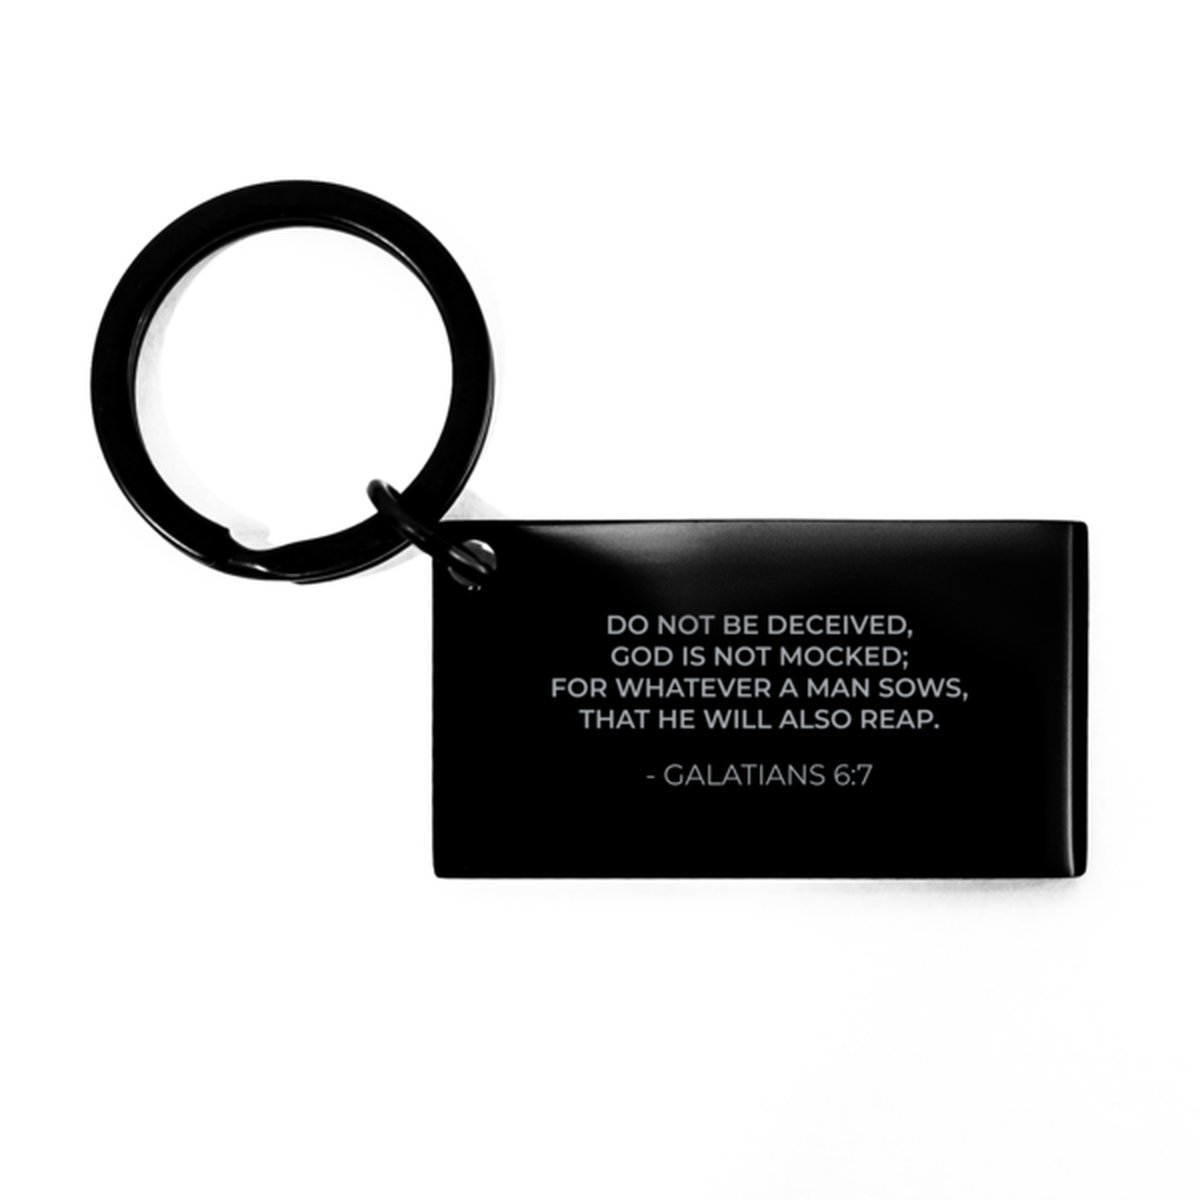 Bible Verse Black Keychain, Galatians 6:7 Do Not Be Deceived, God Is Not Mocked; For, Christian Inspirational Key Ring Gifts For Men Women